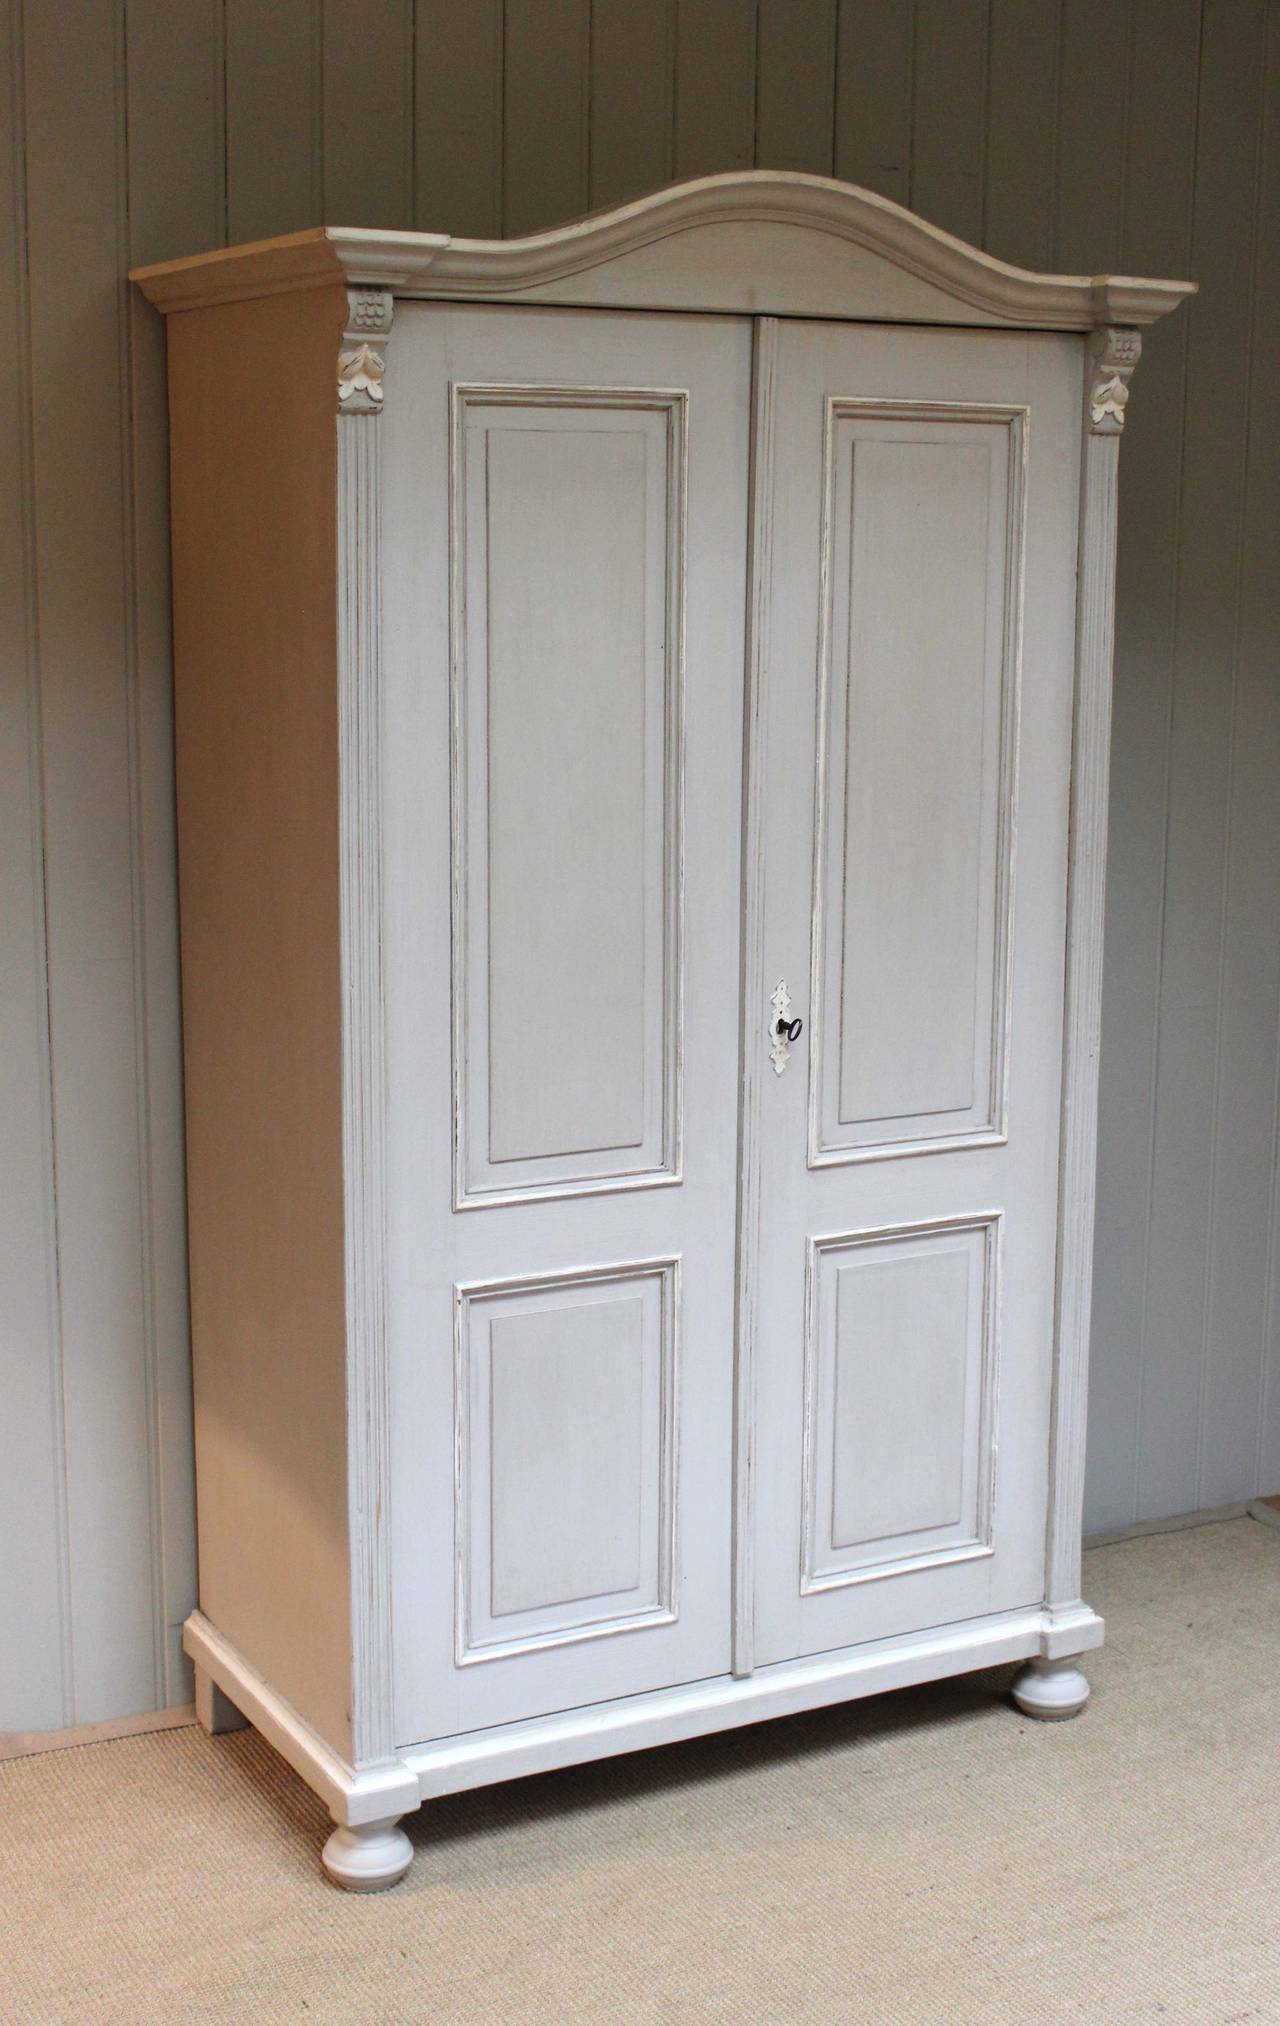 Continental painted two door wardrobe having fielded panelled doors with reeded side piliasters having a carved leaf detail.Fitted internally with a shelf and hanging rail (the internal depth is 40 cm) 
Approximate uk delivery cost for this item